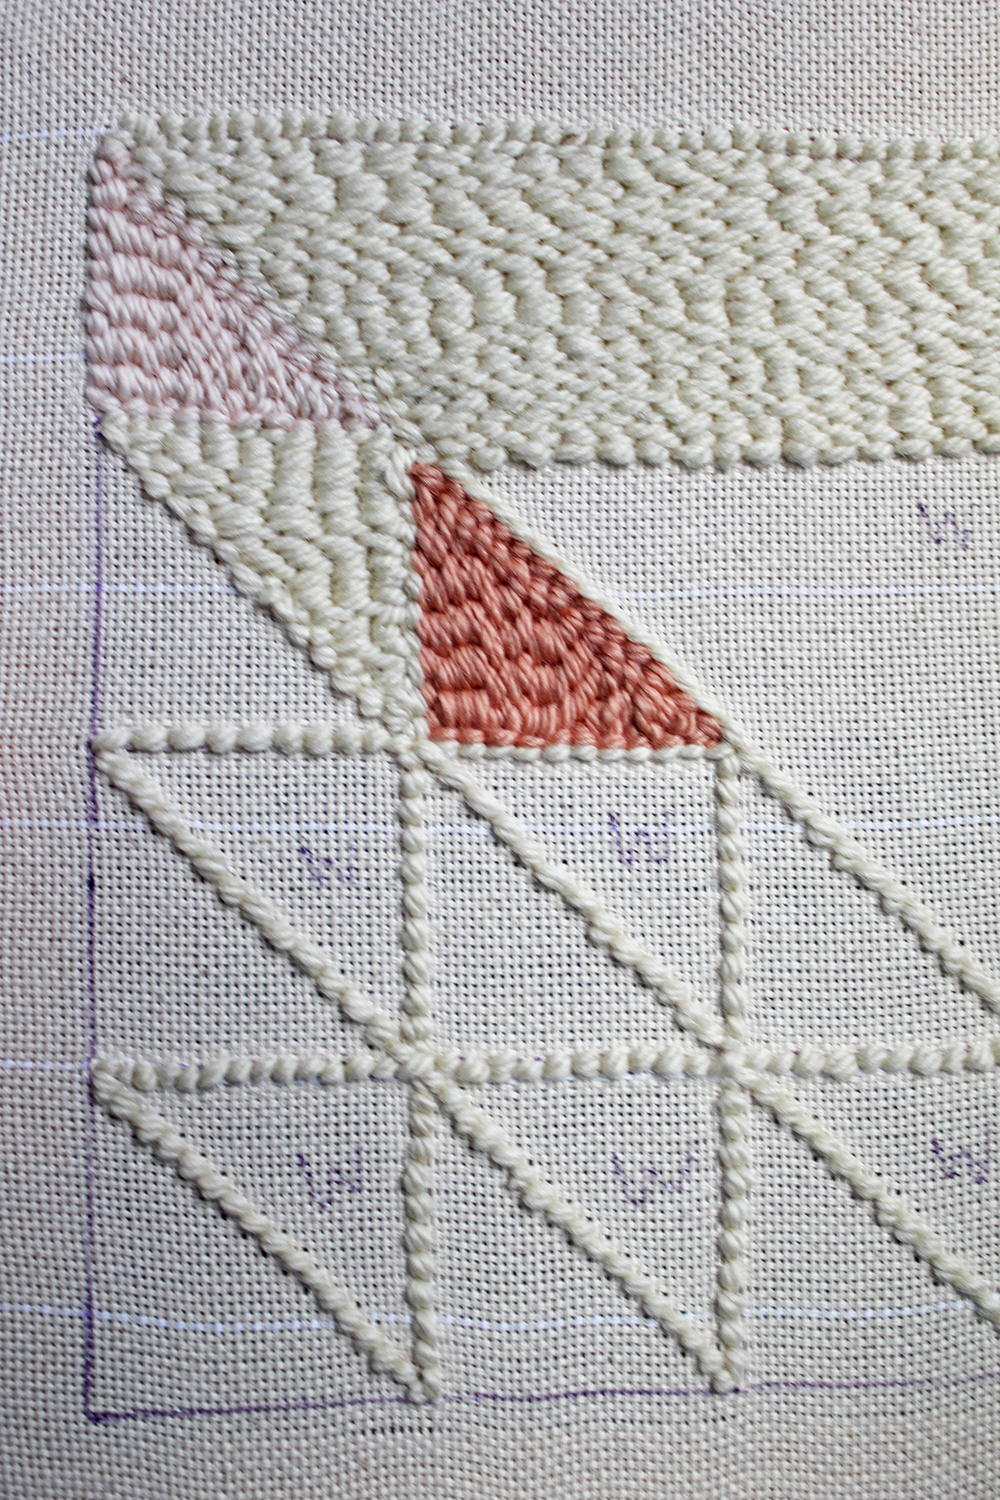 Turn a Suzy Quilts pattern into a punch needle masterpiece with this step by step tutorial! Learn a new fiber arts skill from scratch, and make a quilt block punch needle canvas to match your latest quilt. suzyquilts.com #quilting #sewingdiy